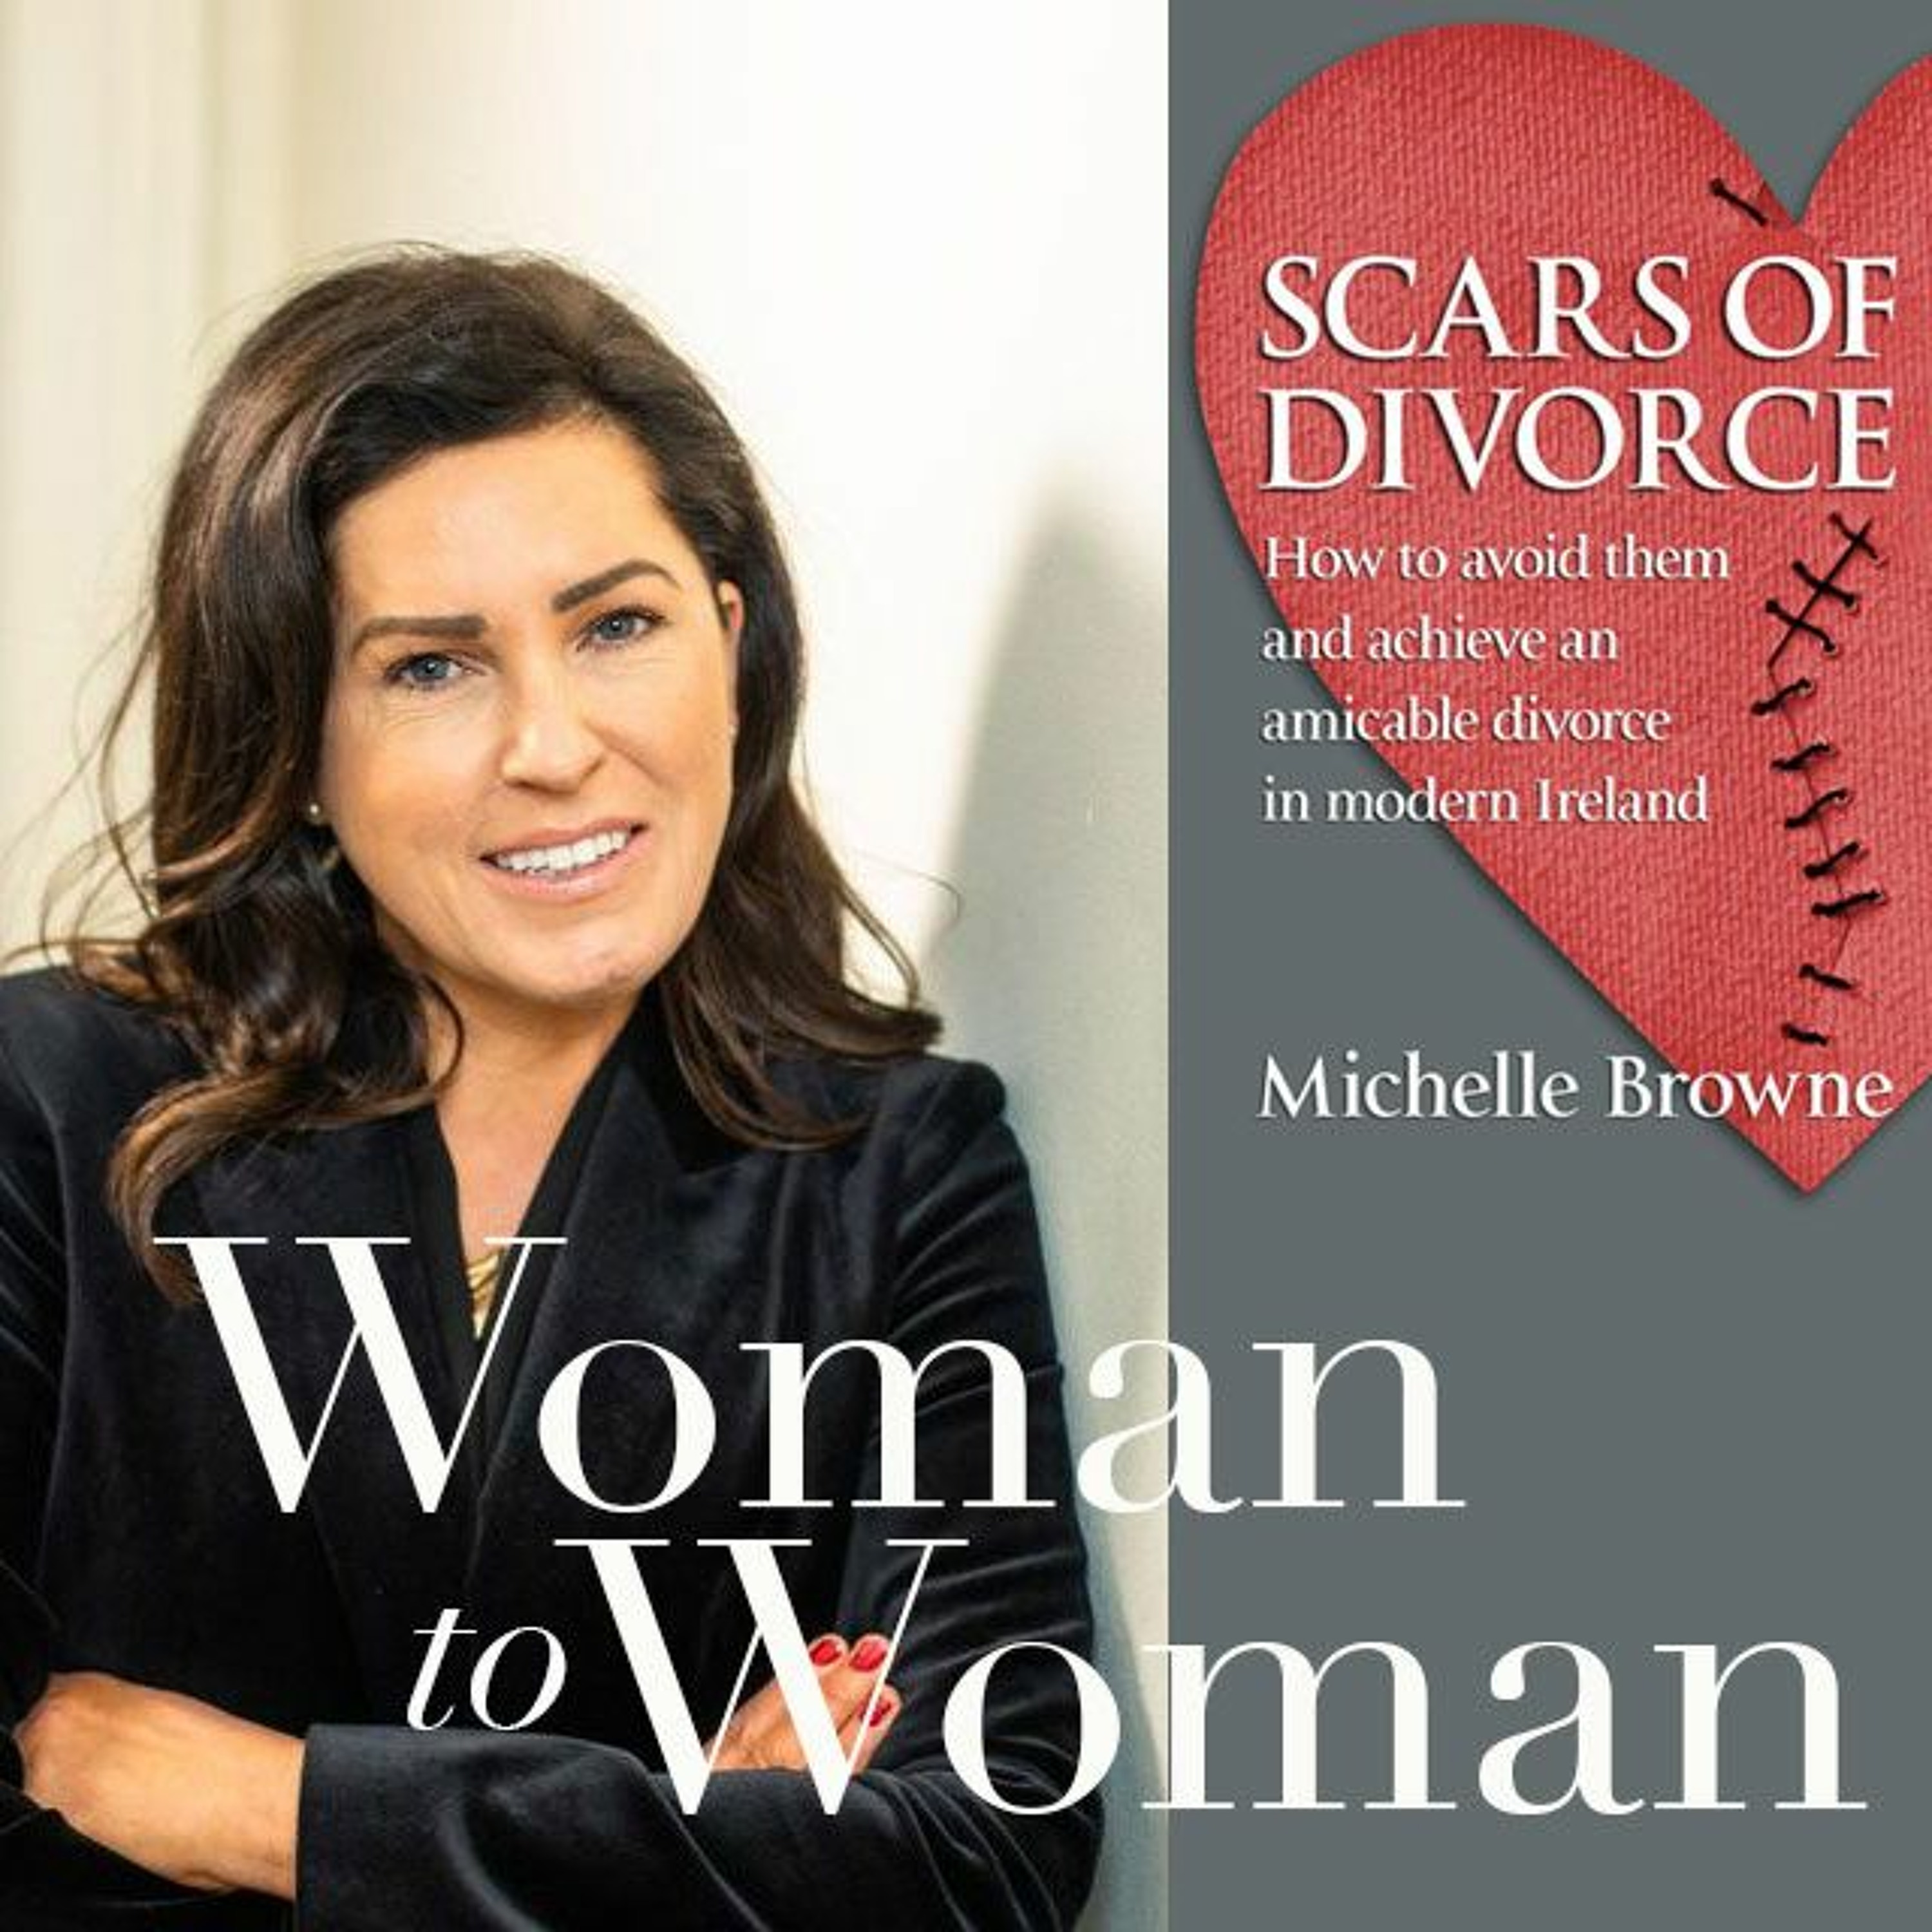 Woman To Woman: Michelle Browne, author of Scars of Divorce